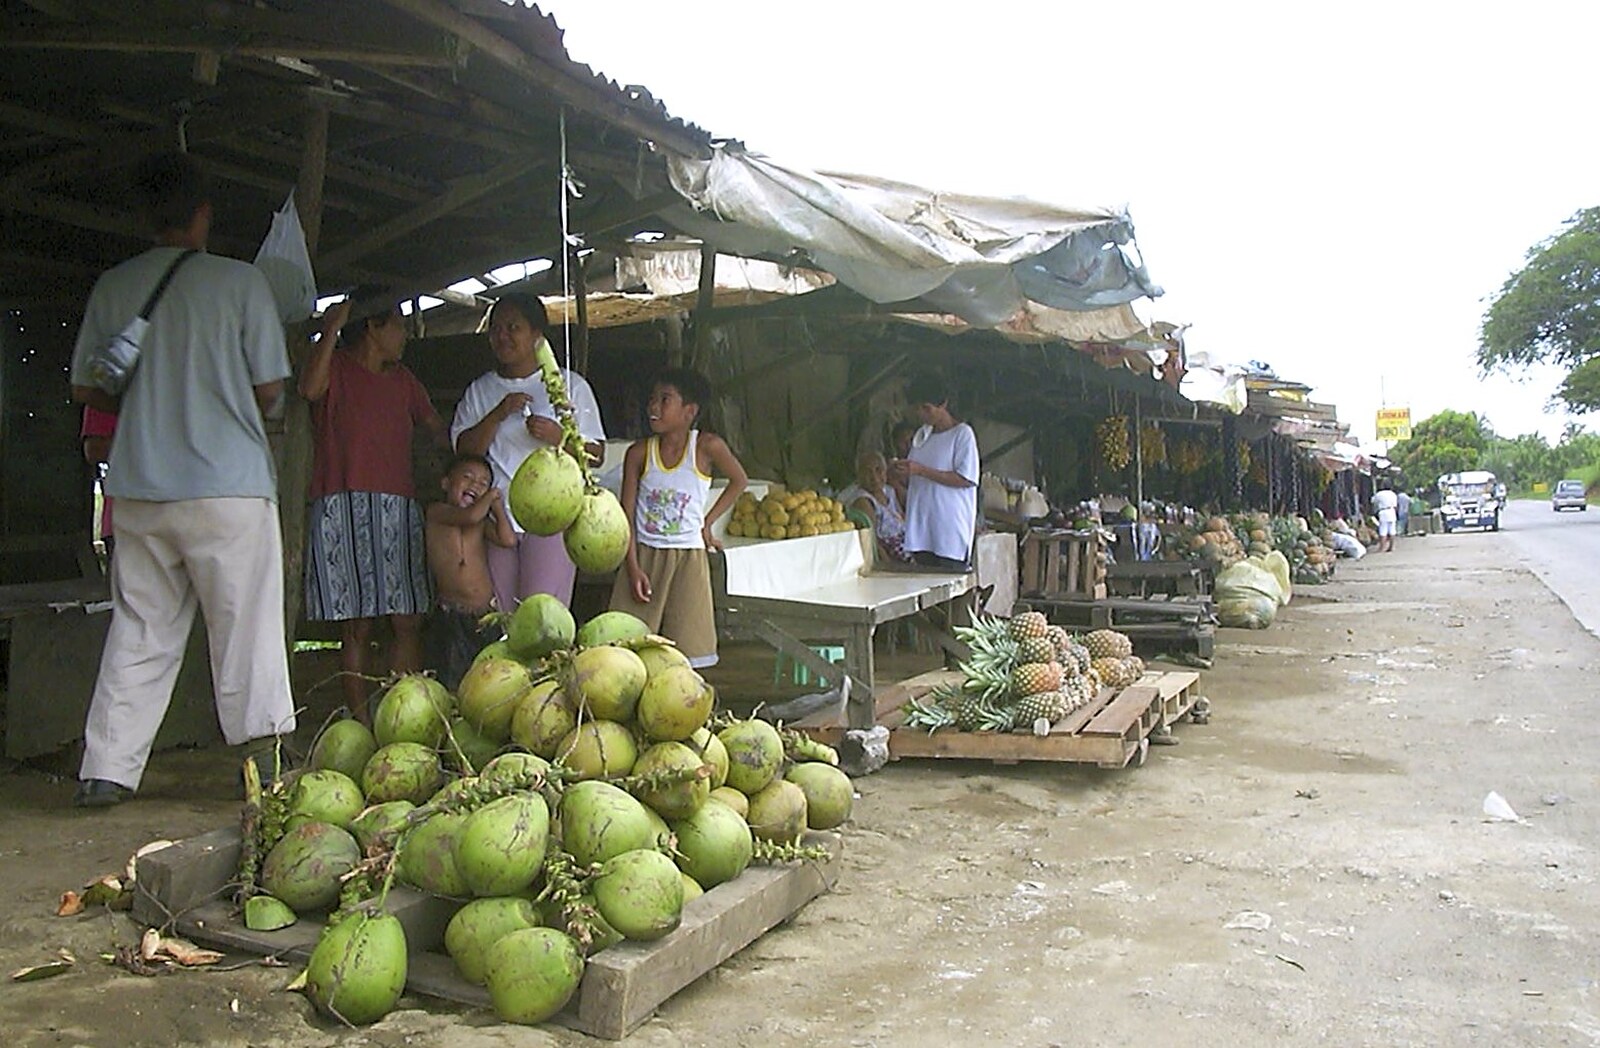 The fruit family from A Postcard From Manila: a Working Trip, Philippines - 9th July 2004